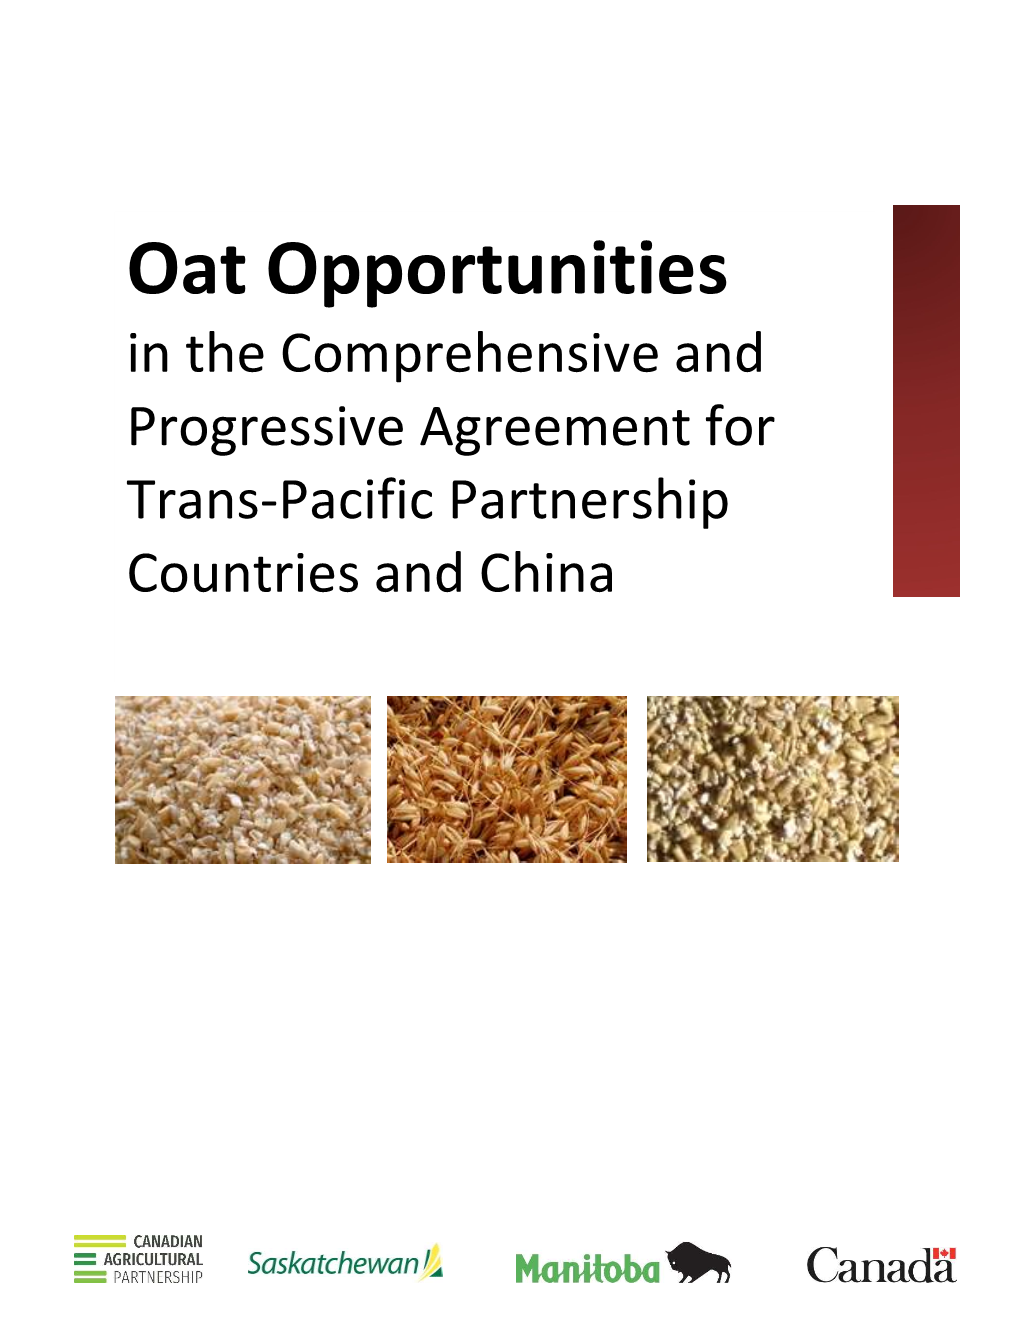 Oat Opportunities in the Comprehensive and Progressive Agreement for Trans-Pacific Partnership